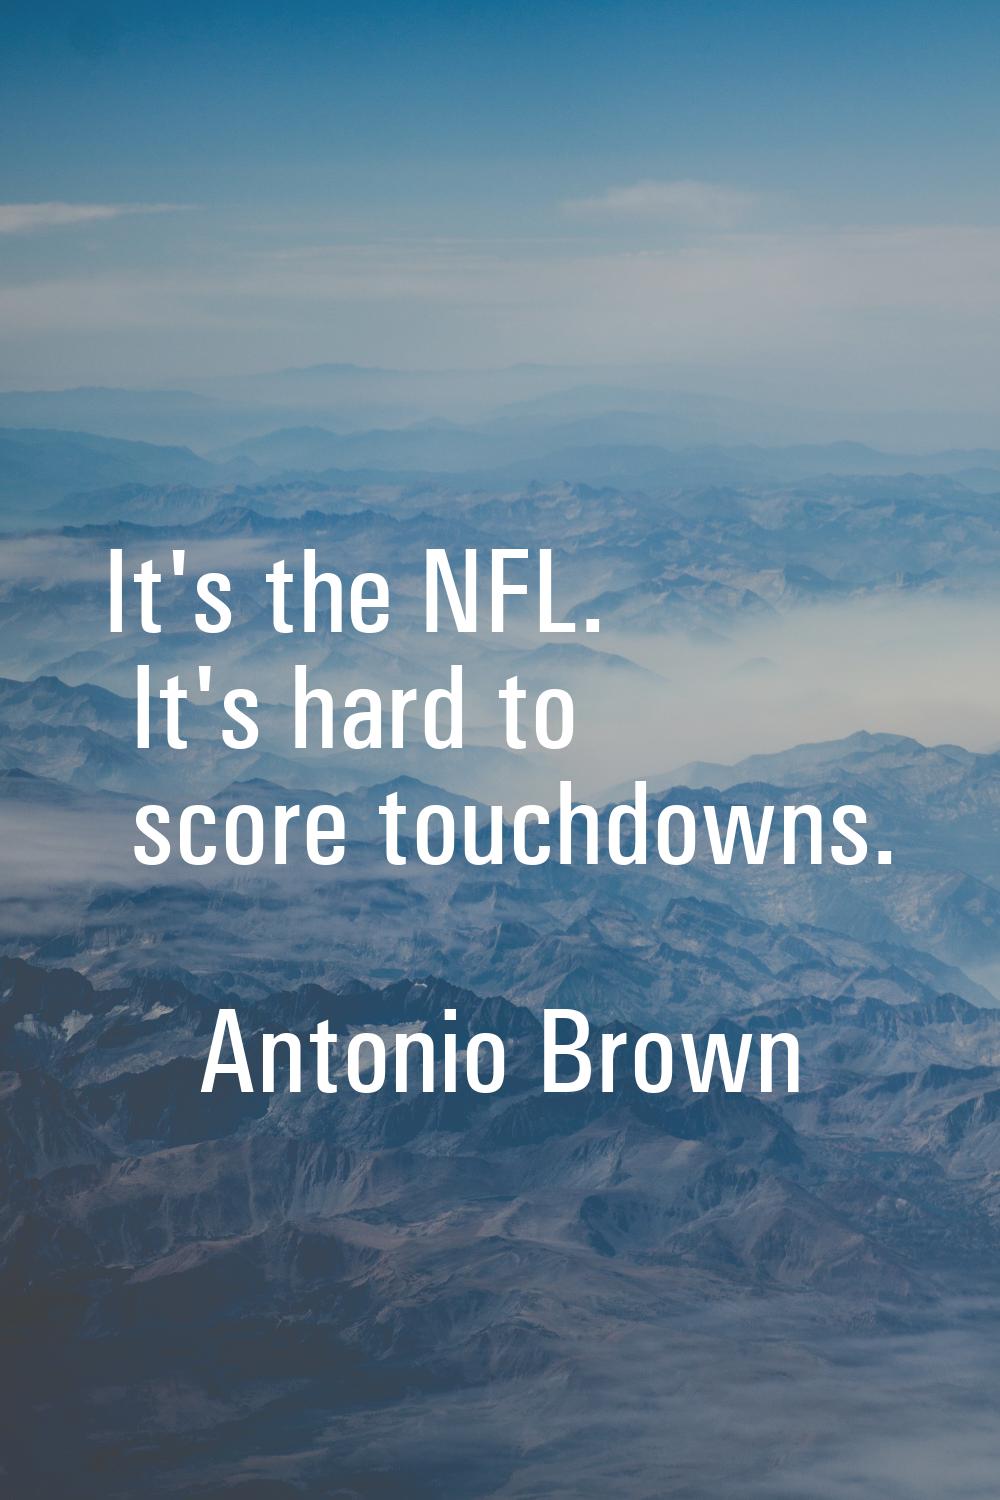 It's the NFL. It's hard to score touchdowns.